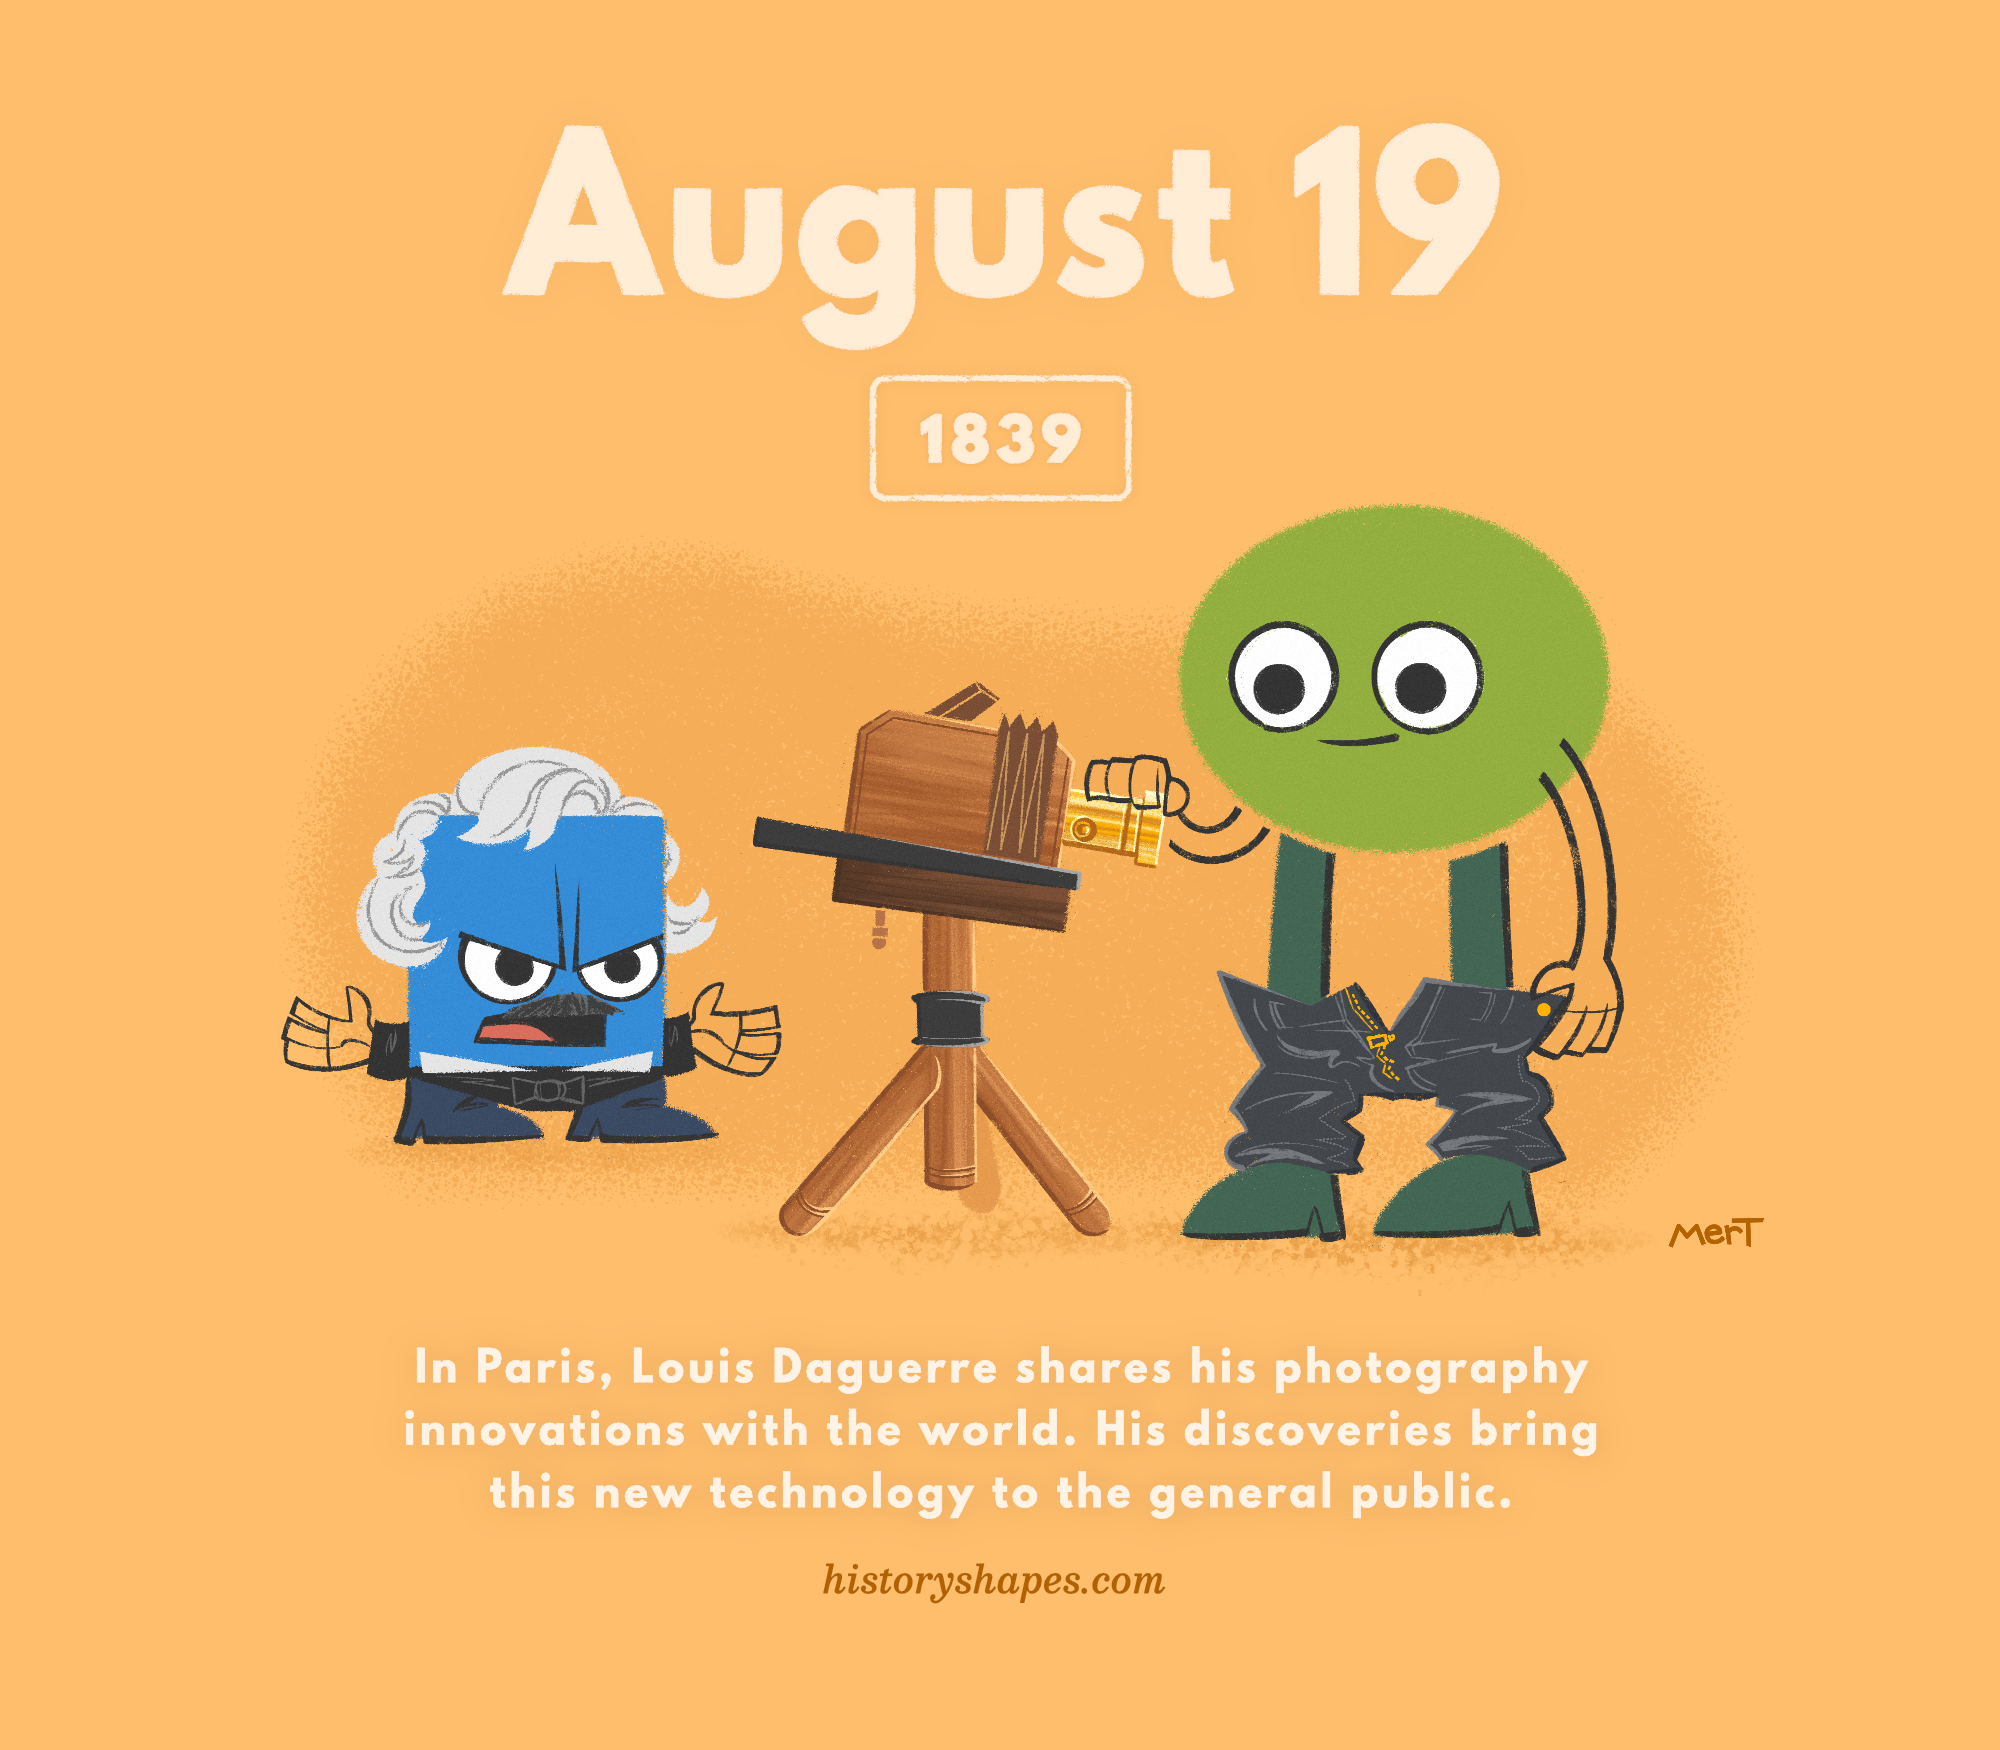 Ray, a grumpy blue square, is dressed as an upset Louis Daguerre. Ray watches Morgan, an awkward green oval, point a camera at his crotch and slide his jeans down. 